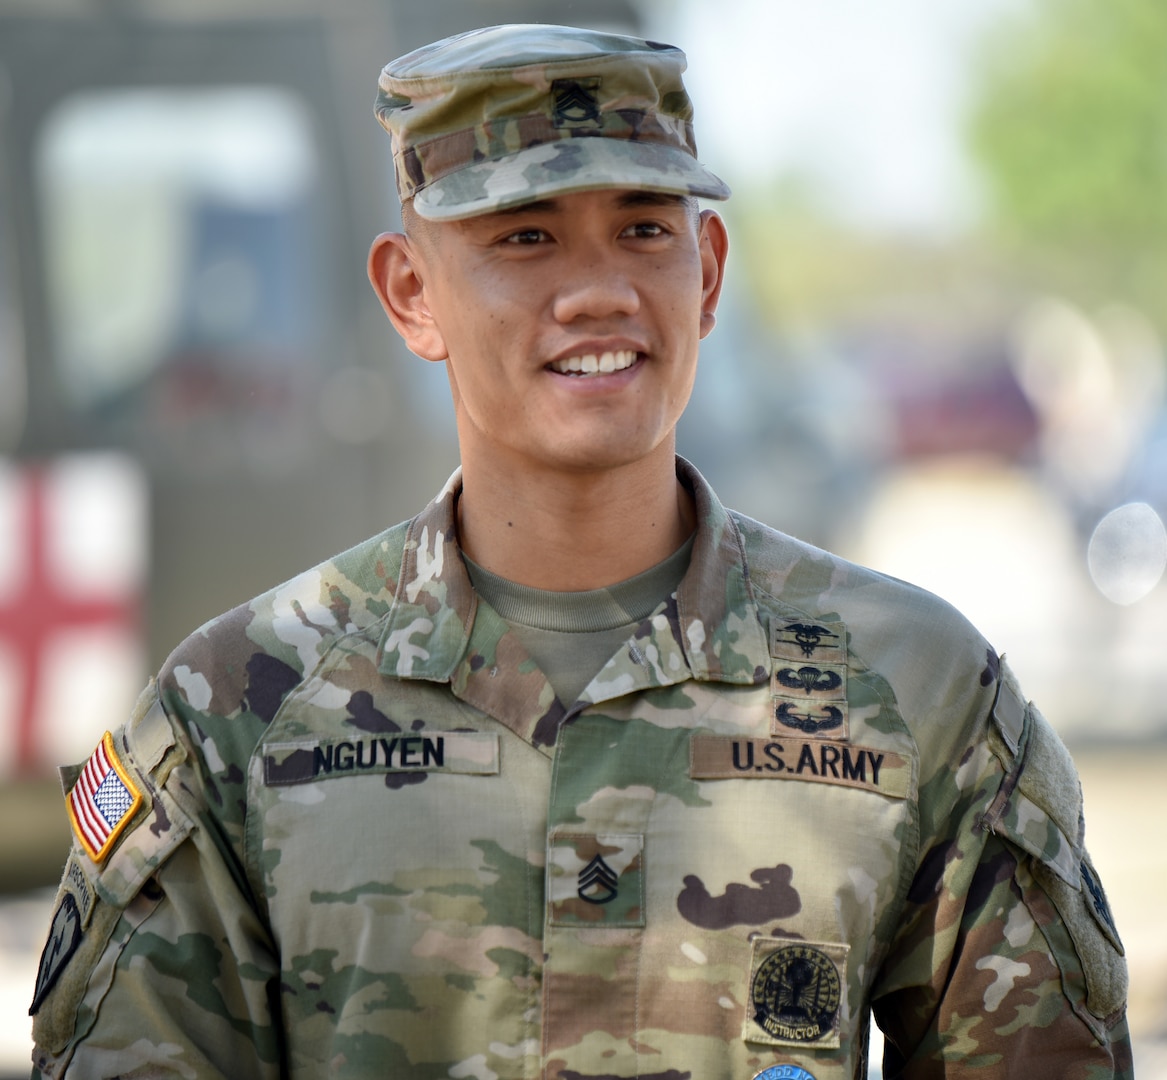 Staff Sgt. Michael Nguyen, the U.S. Army Medical Center of Excellence 2020 Best Warrior Noncommissioned Officer, pictured outside of the U.S. Army Medical Center of Excellence Headquarters building Aug. 25.